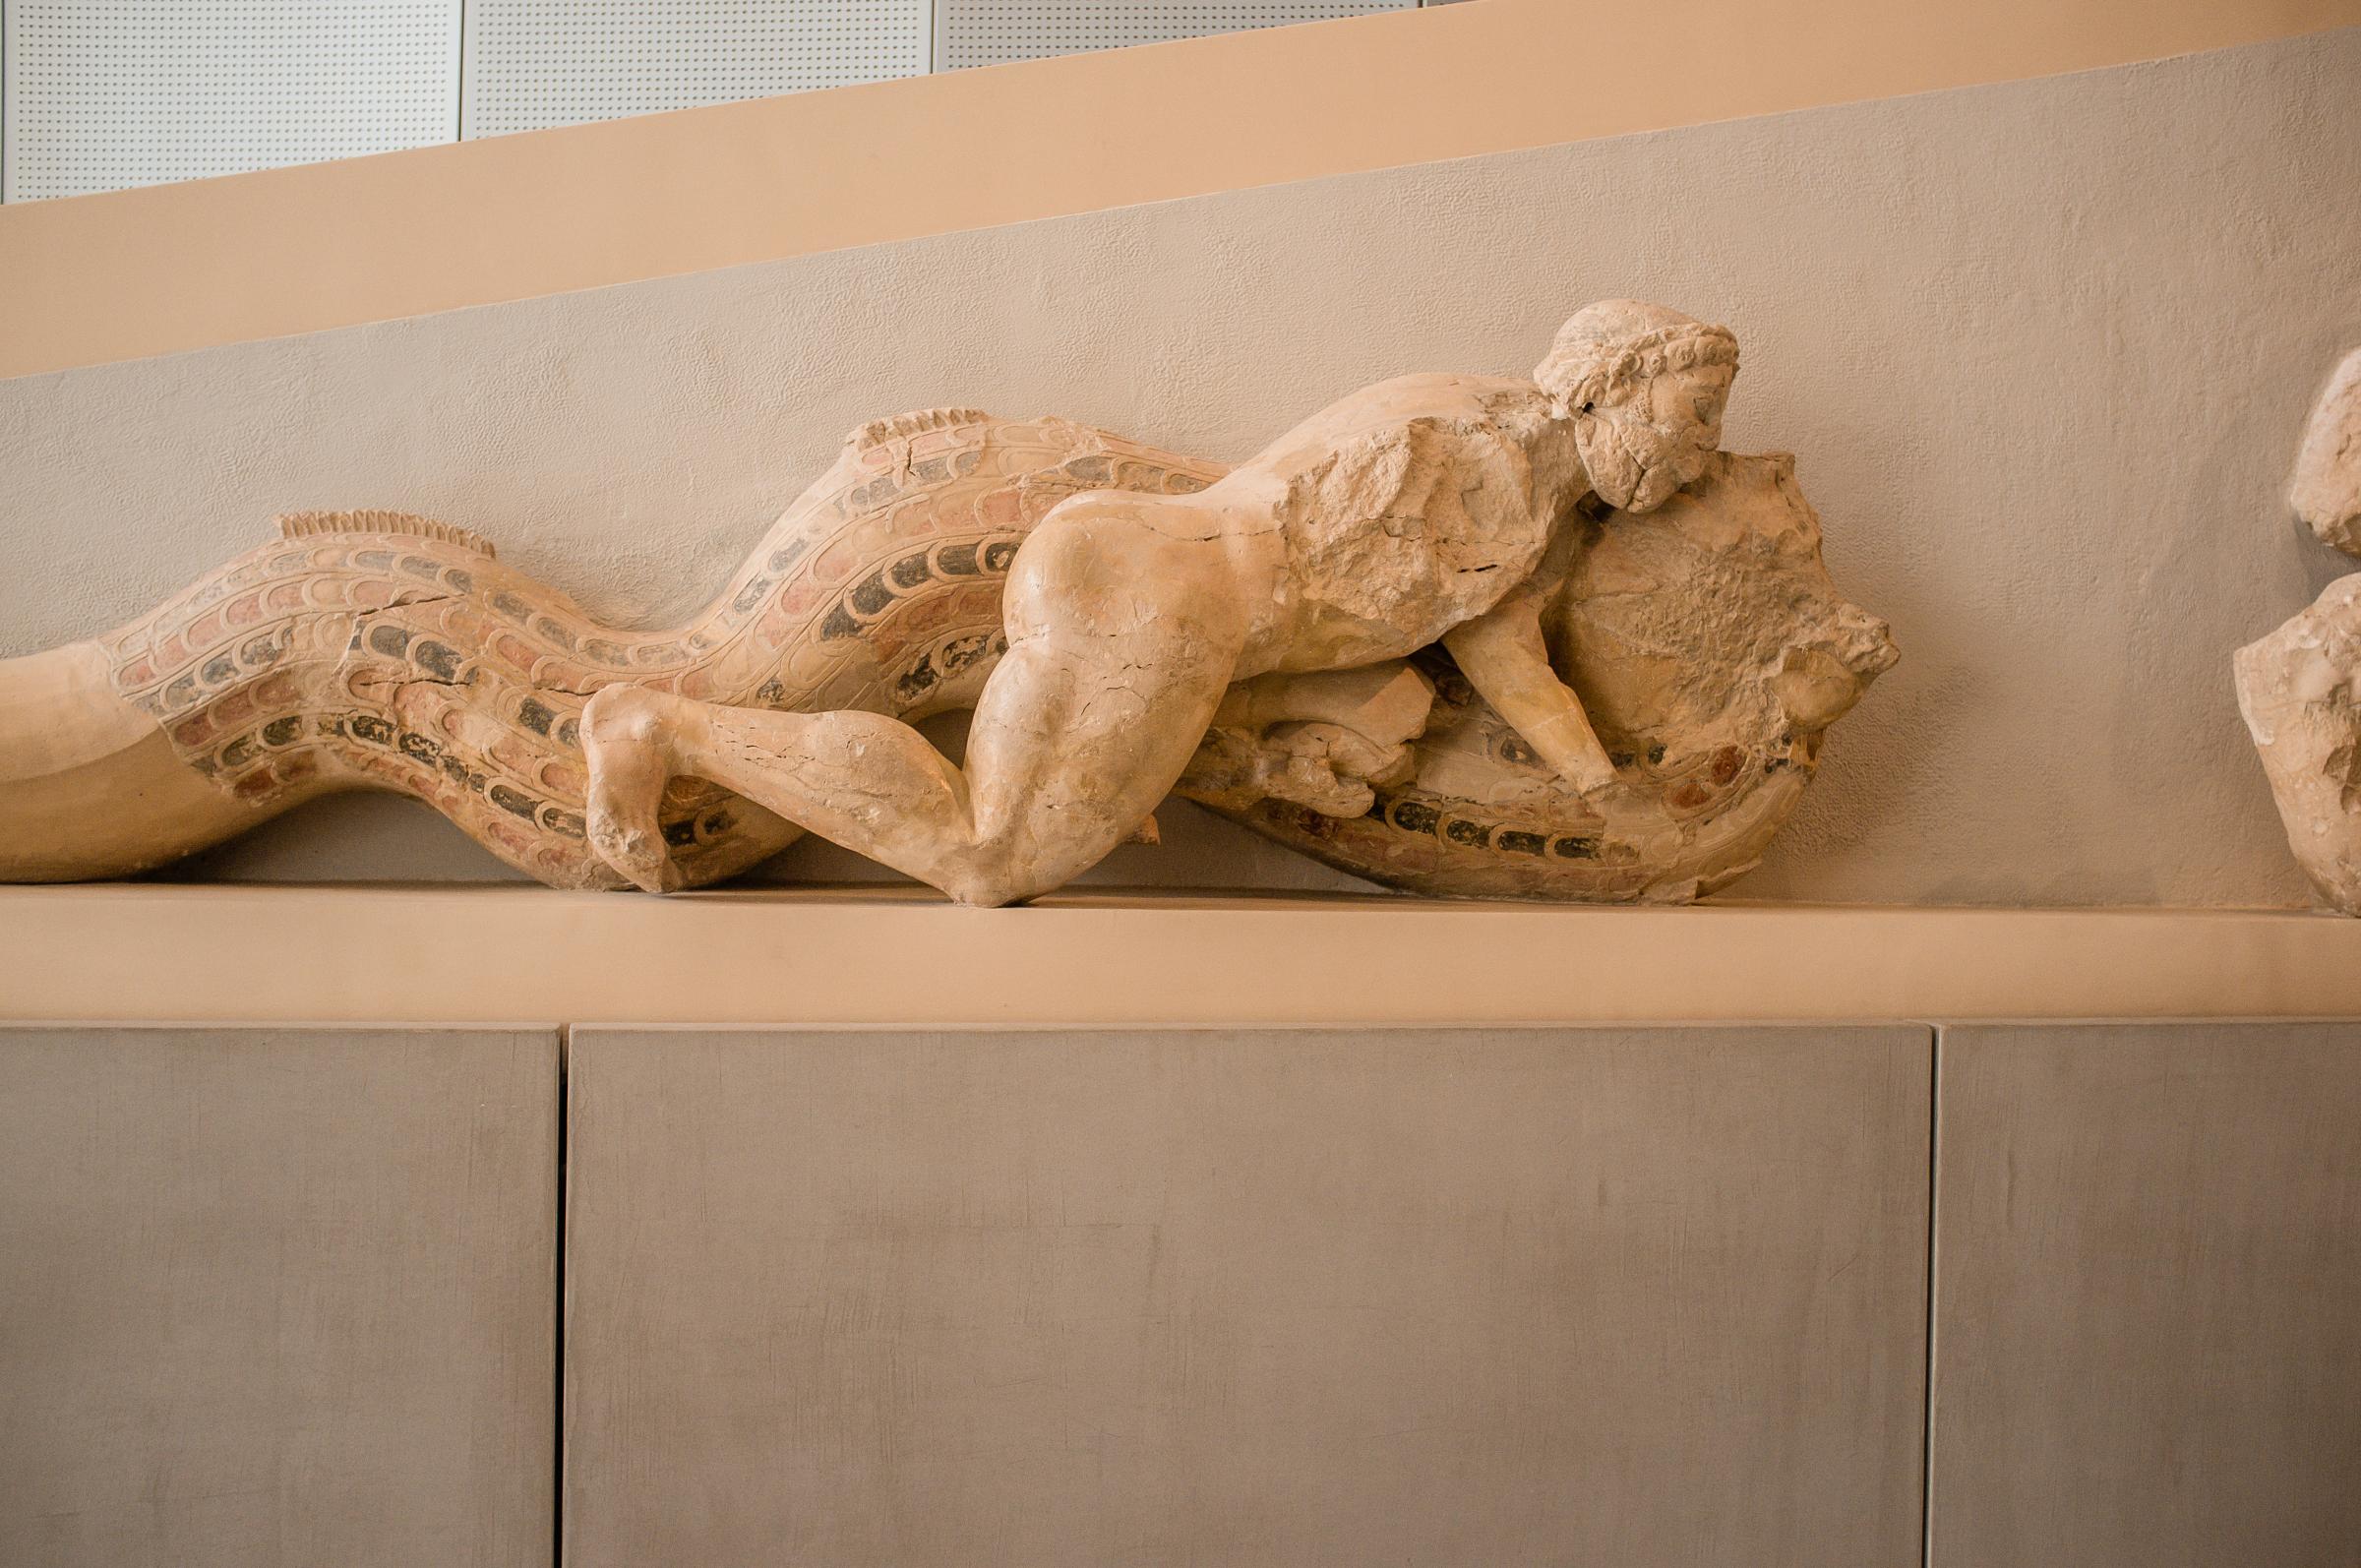 acropolis - the sculpture of Herakles wrestling with a sea deamon in...